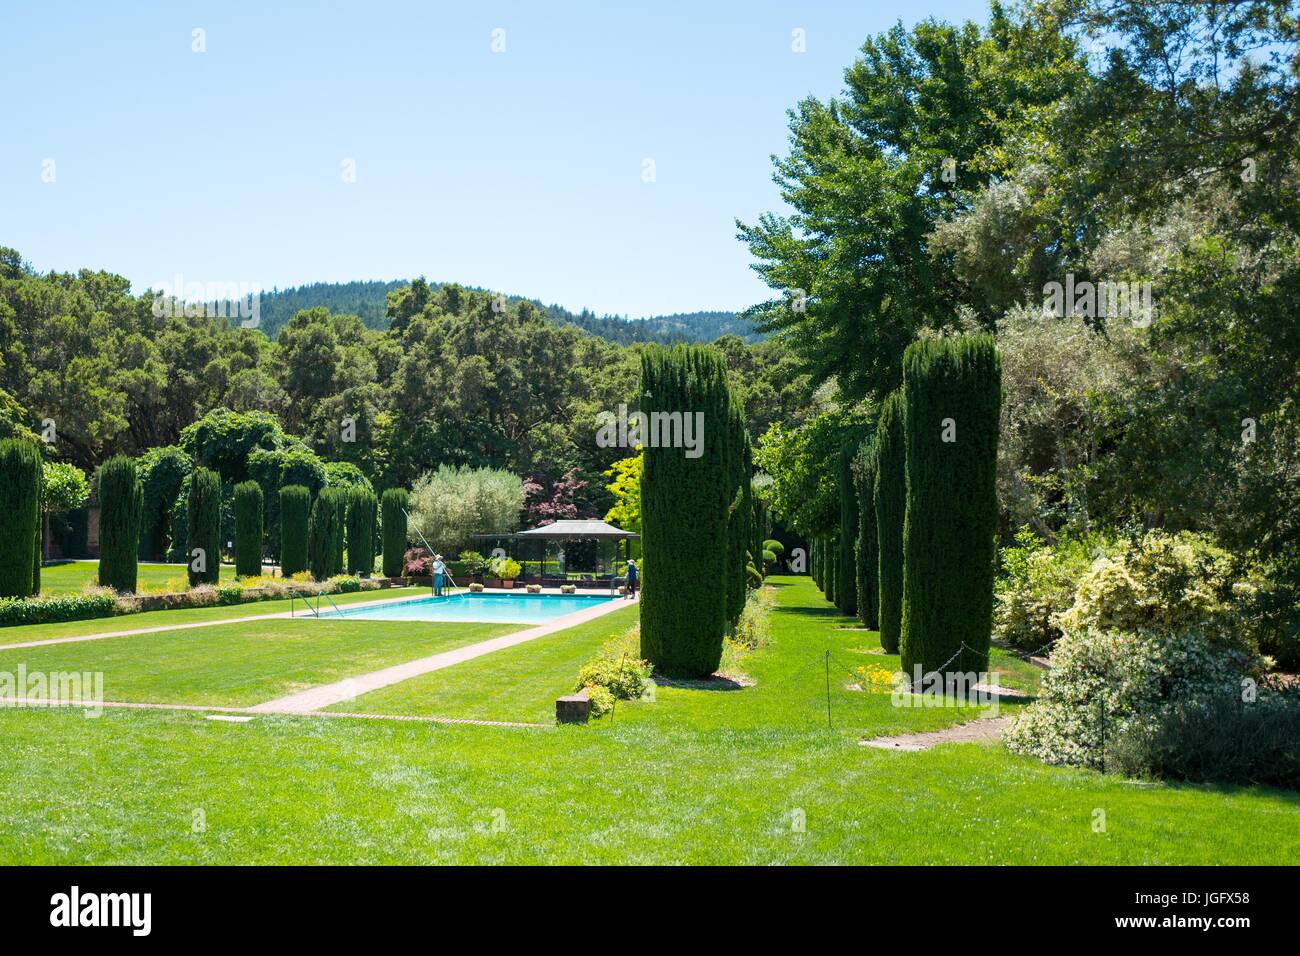 Swimming pool among formal gardens, added in 1945, at Filoli, a preserved country house, formal garden and estate operated by the National Trust for Historic Preservation in Woodside, California, June 23, 2017. Stock Photo